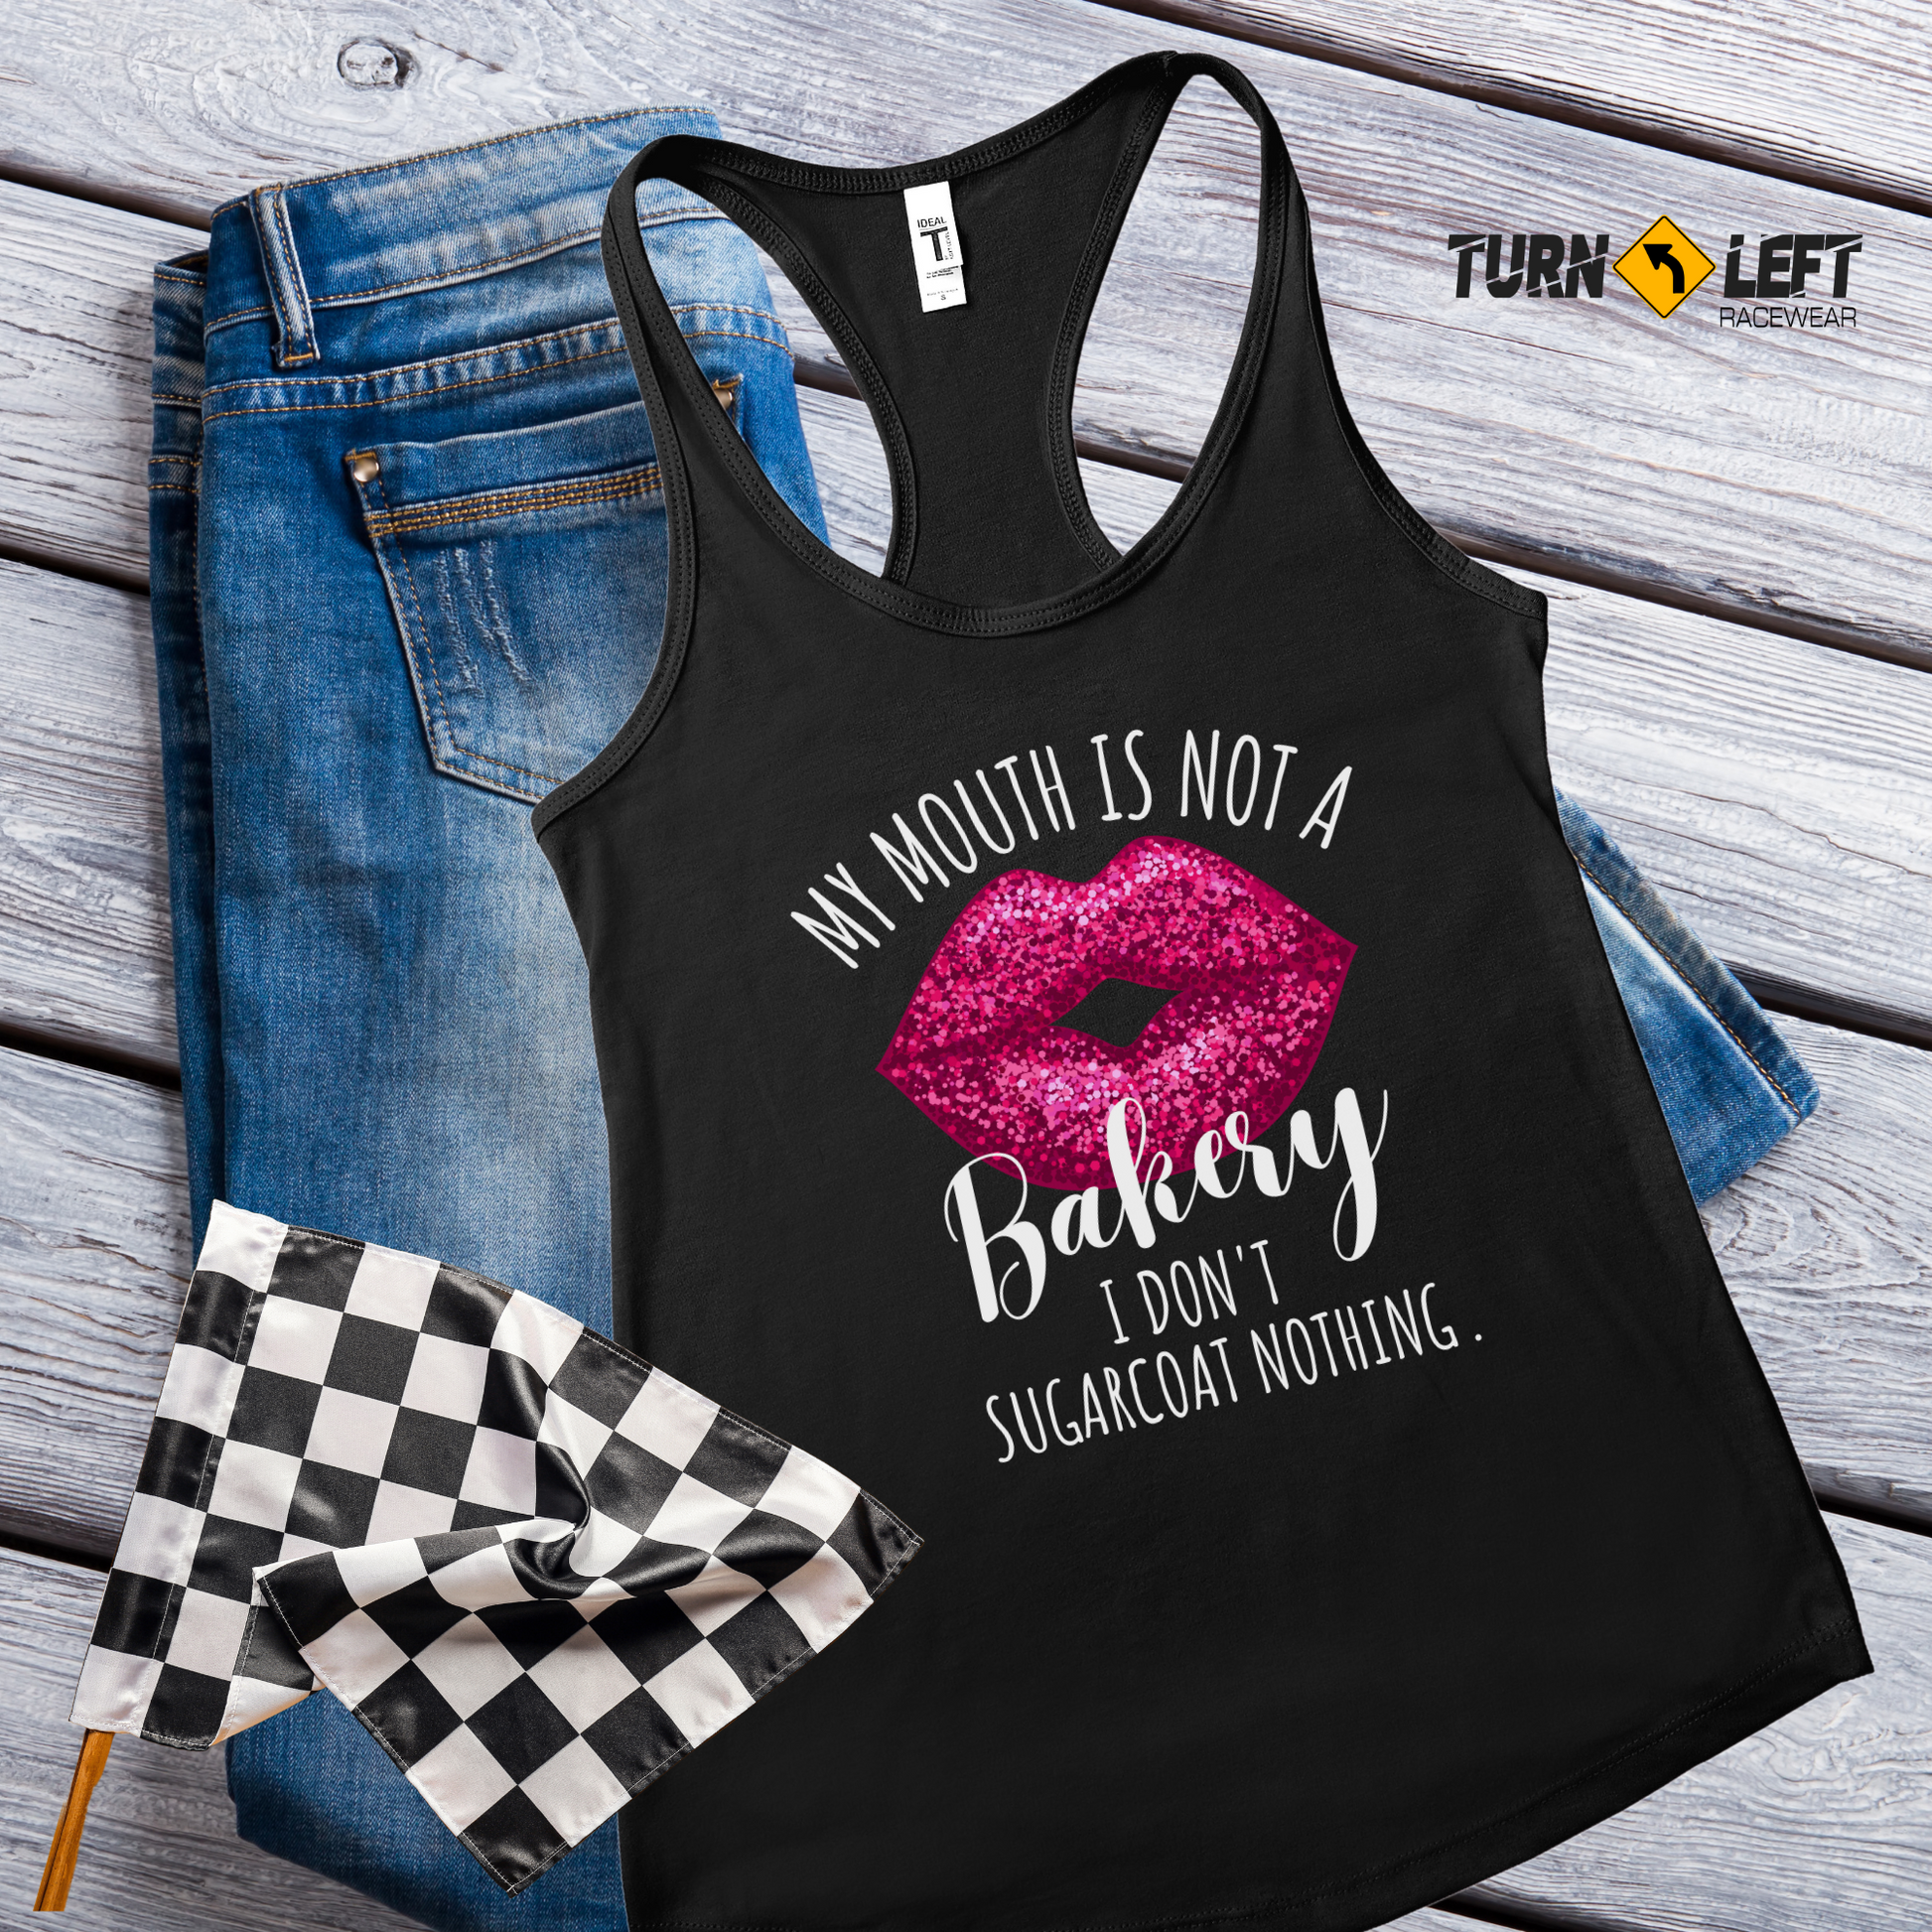 Women's Dirt Track Racing Tank Tops. Funny Racing Quote Shirts for Women. My Mouth Is Not A Bakery I Don't Sugarcoat Nothing